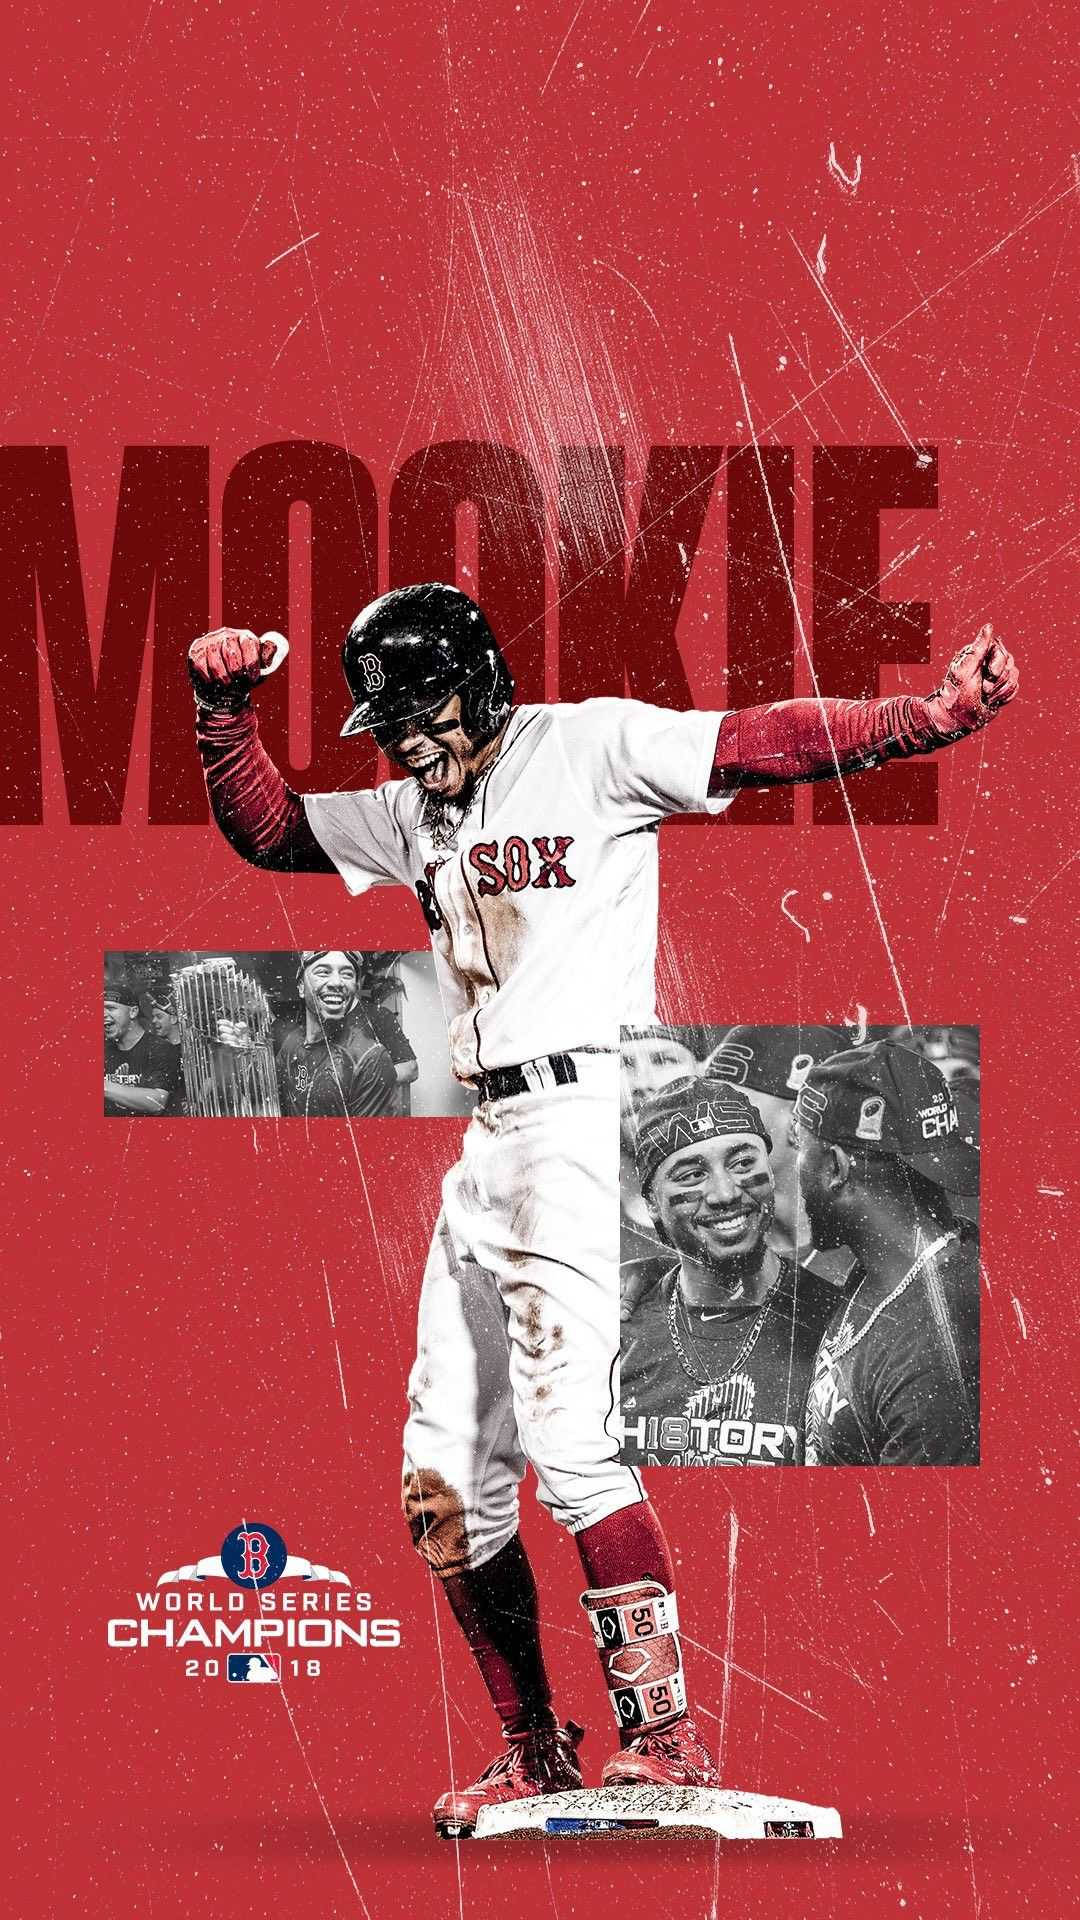 Red Sox Player Mookie Betts Wallpaper